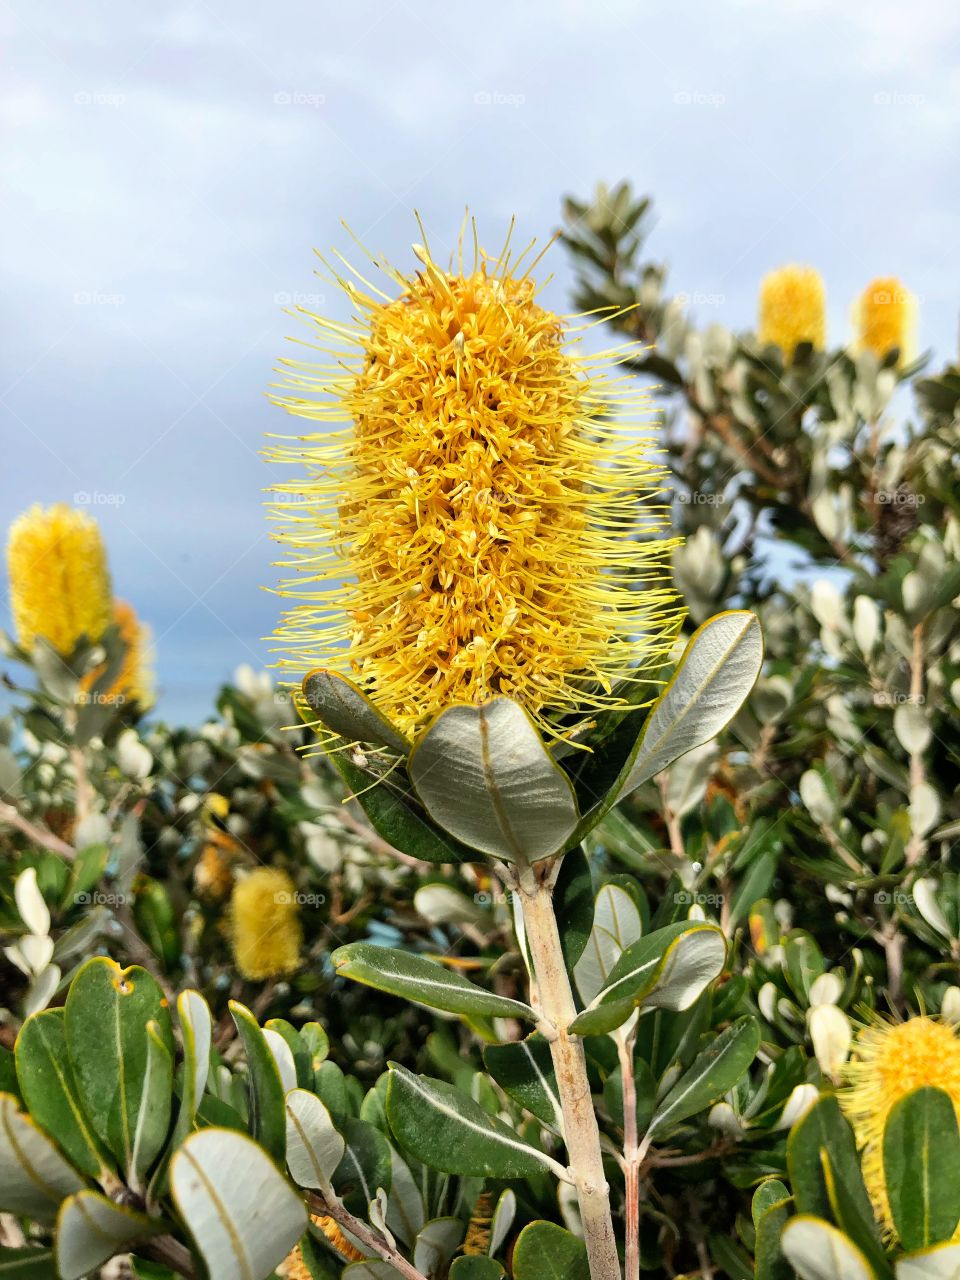 Native Australian banksia flower and plant yellow in color against a blue sky with grey and green leaves during the day